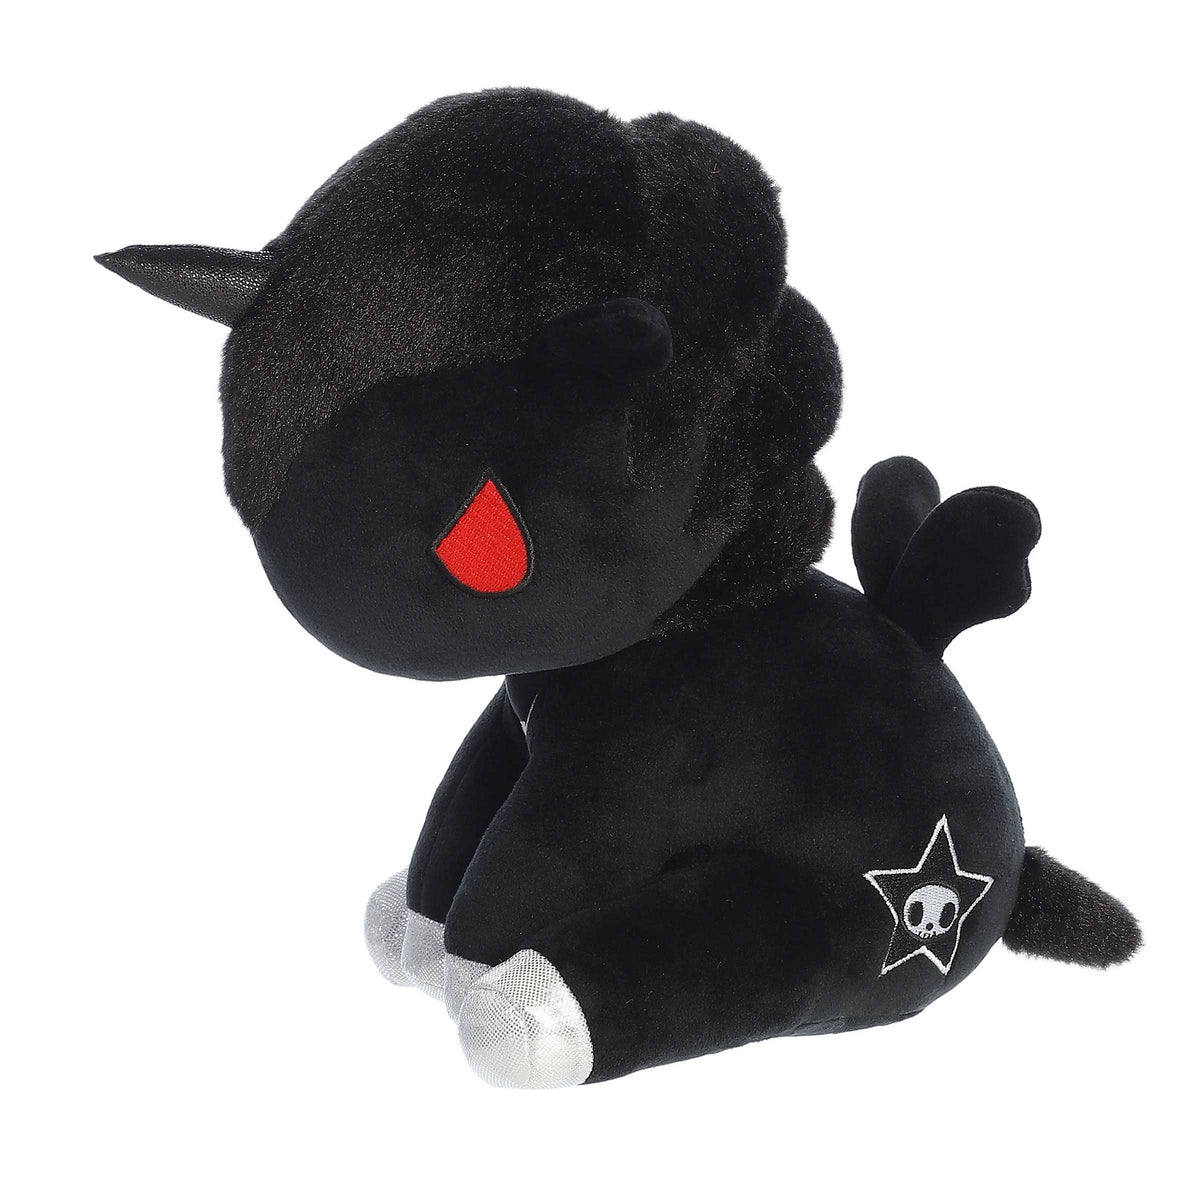 Cuddly cute unicorn plush in a sitting position with black body and black fur, sparkly silver hooves and red accents on eyes.